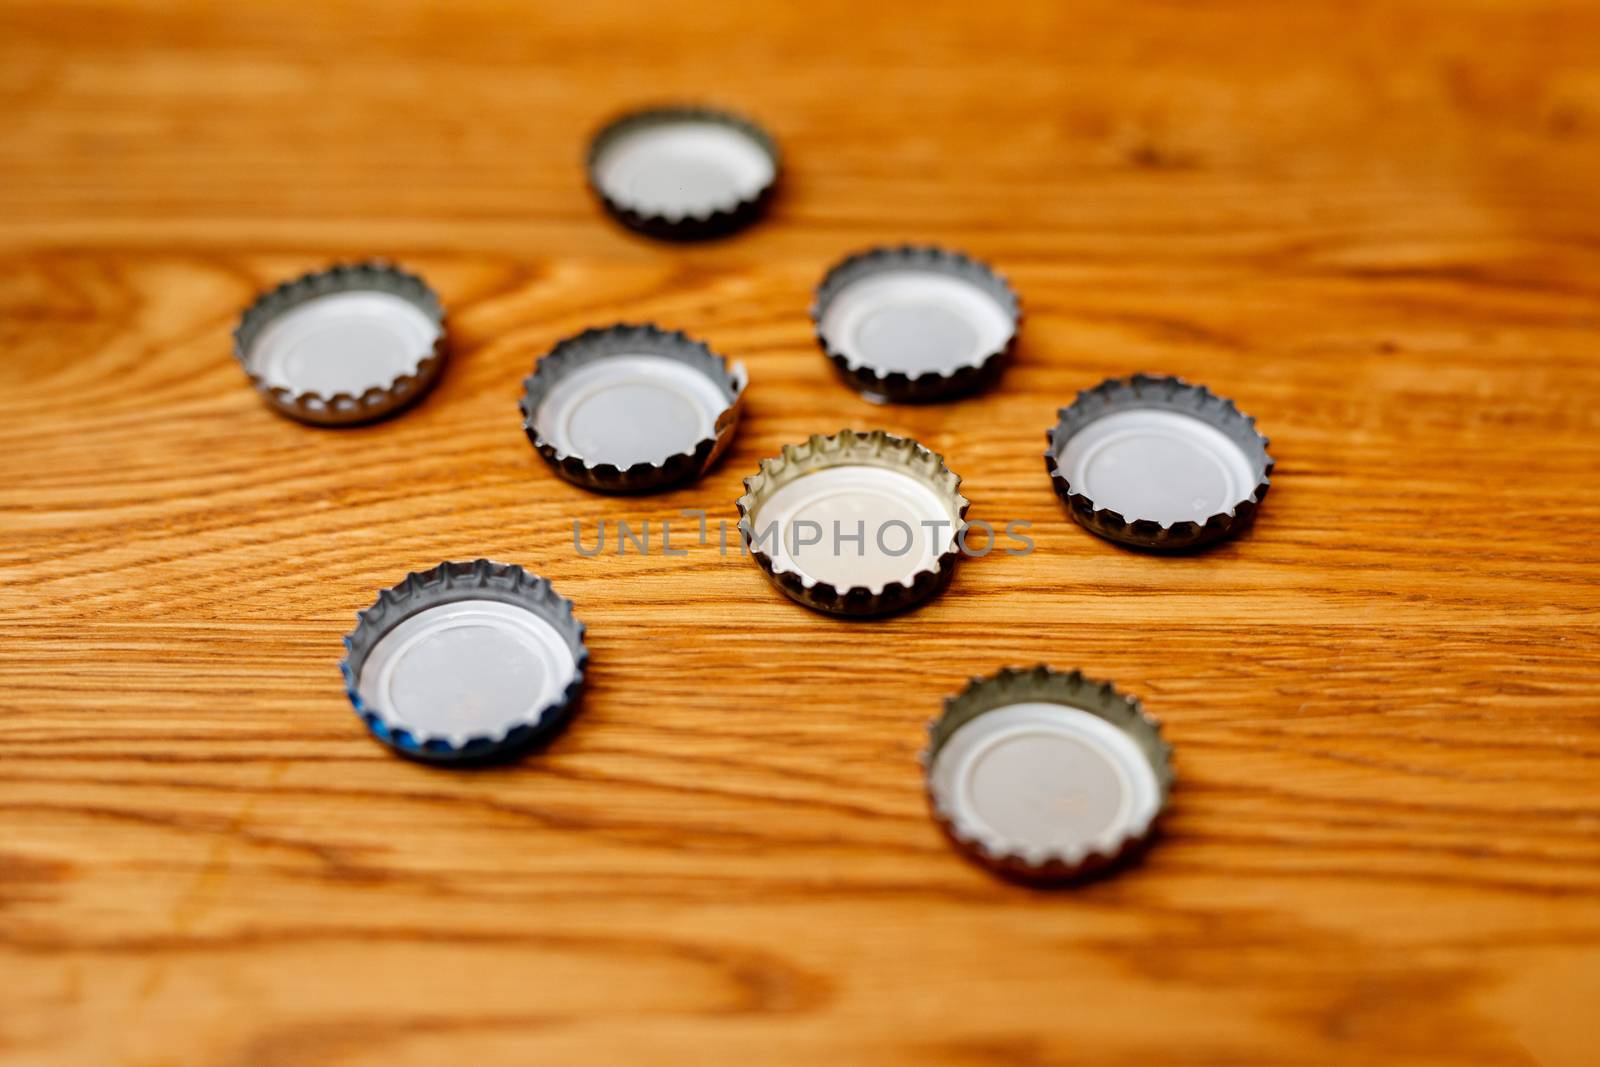 Beer bottle caps on a wooden table